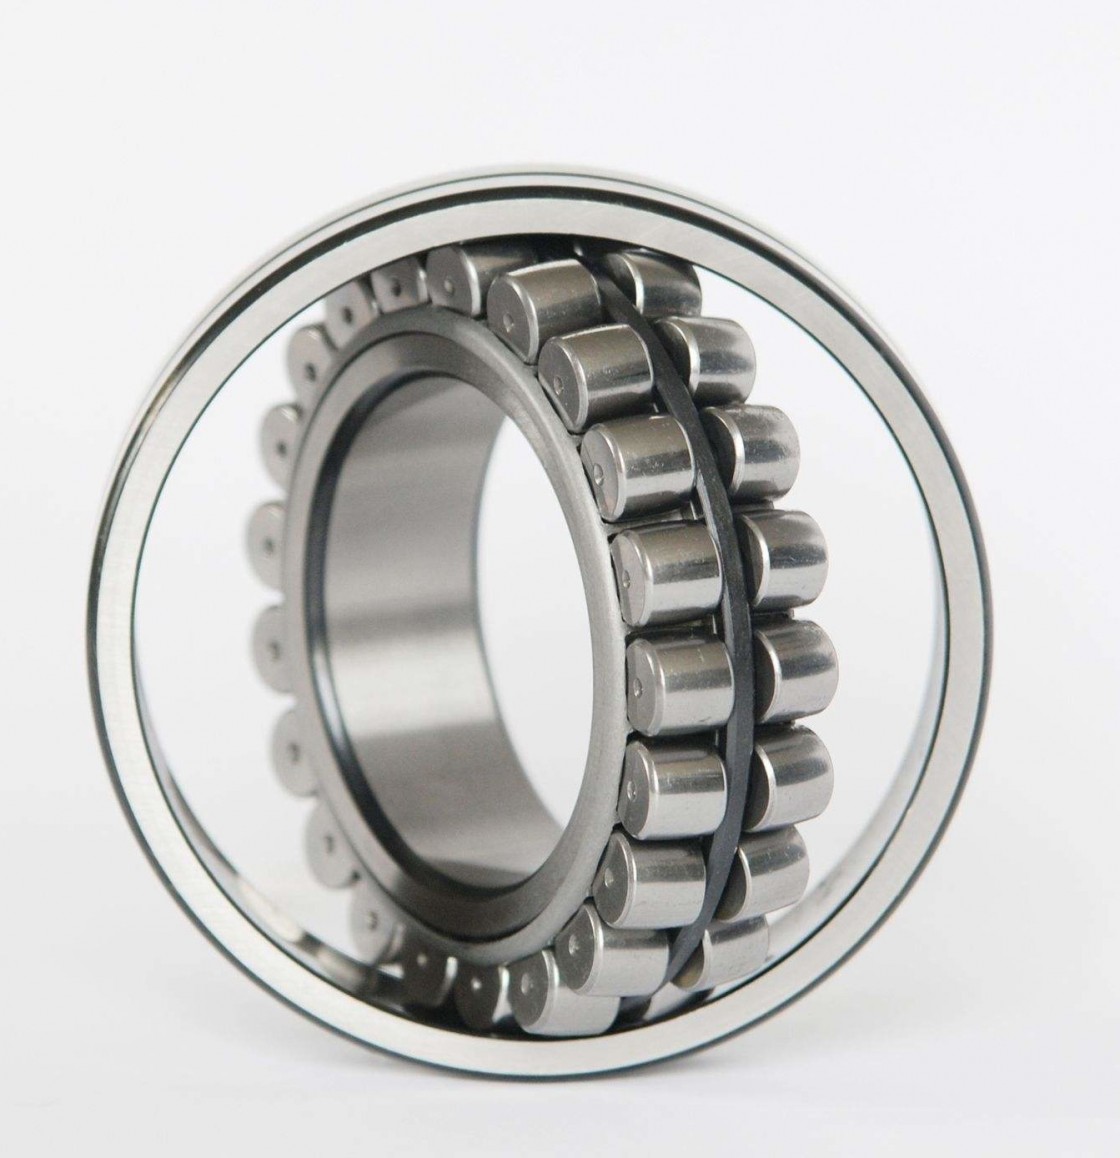 Dynamic (Ca) ZKL NU324 Single row cylindrical roller bearings